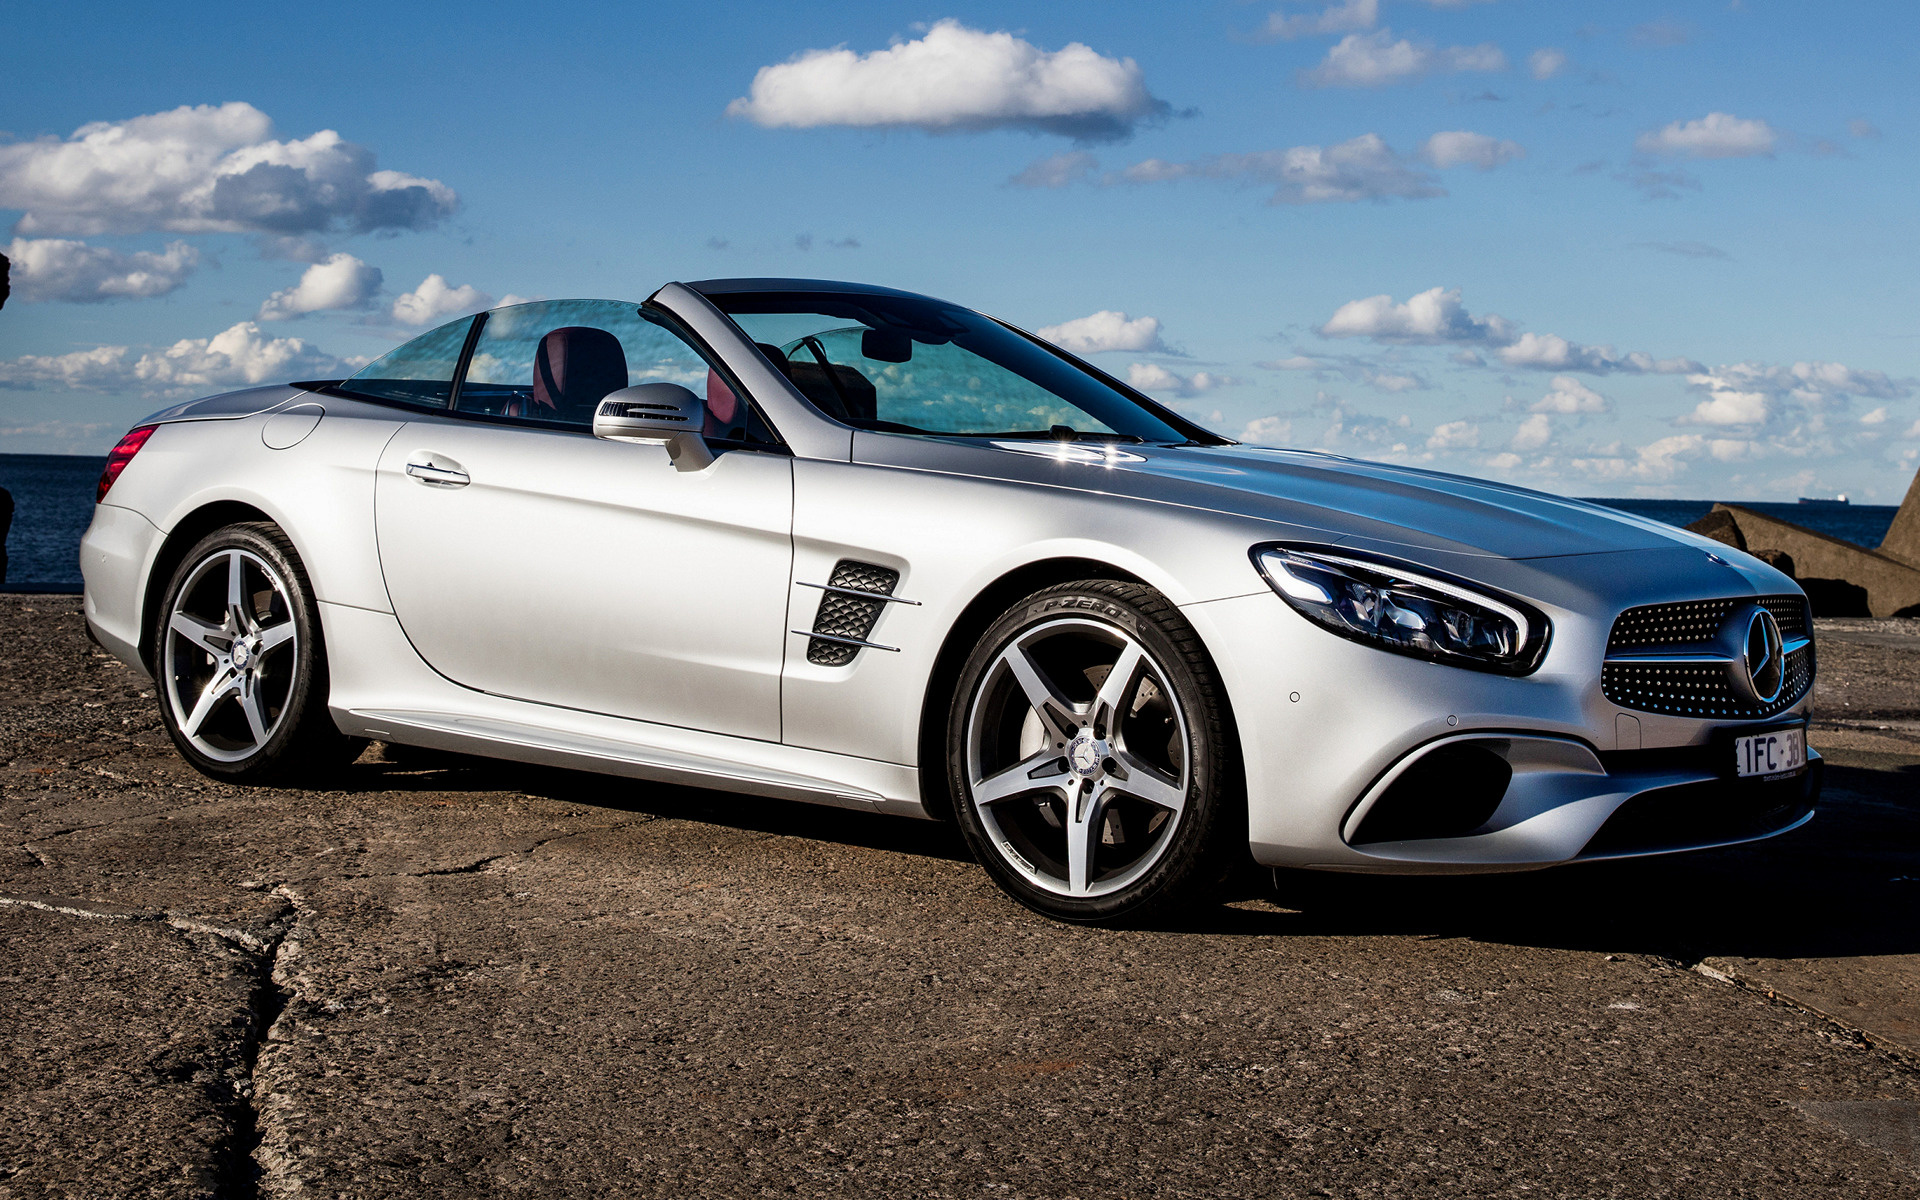 Mercedes Benz SL Class 2016 AU Wallpapers and HD Images